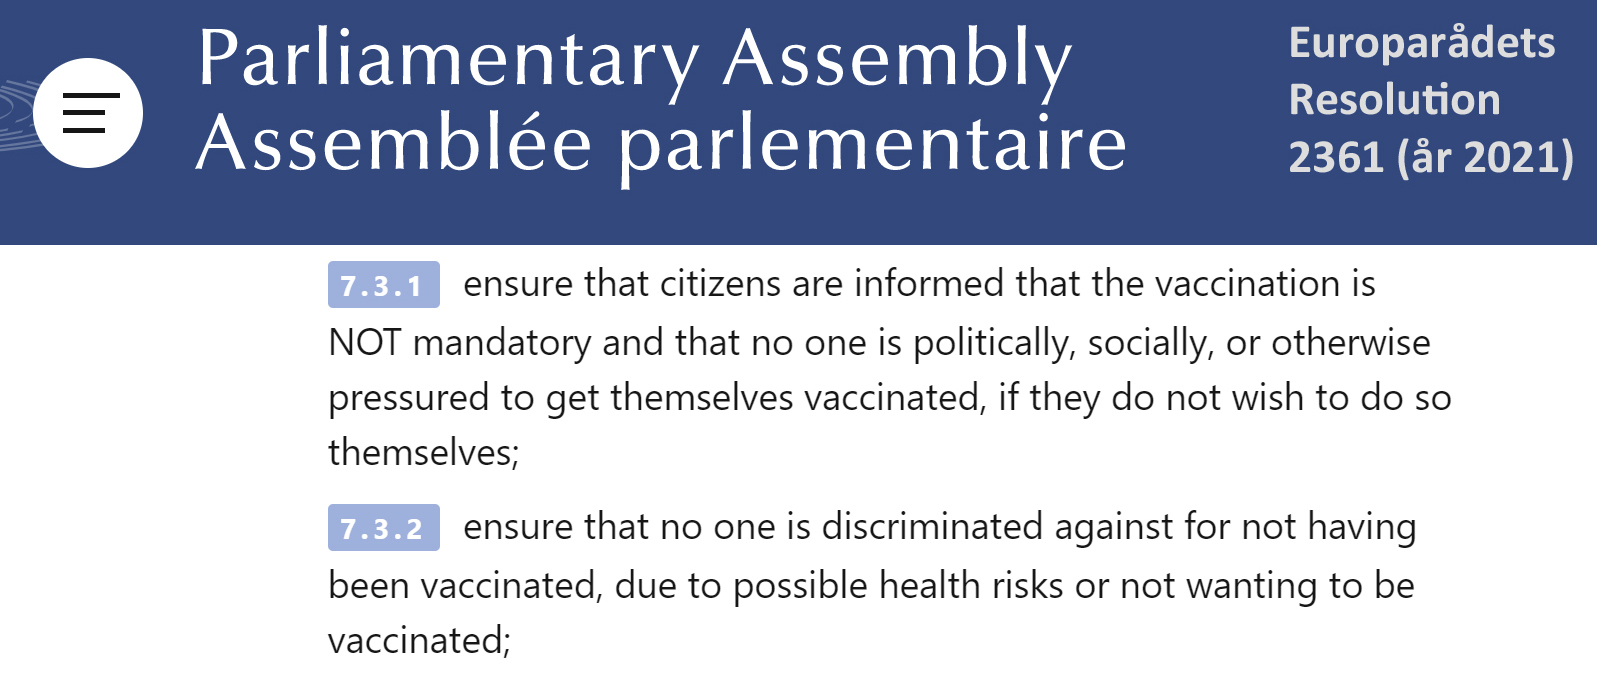 Council of Europe resolution 2361 on the riight to say no to vaccinations without being discriminated